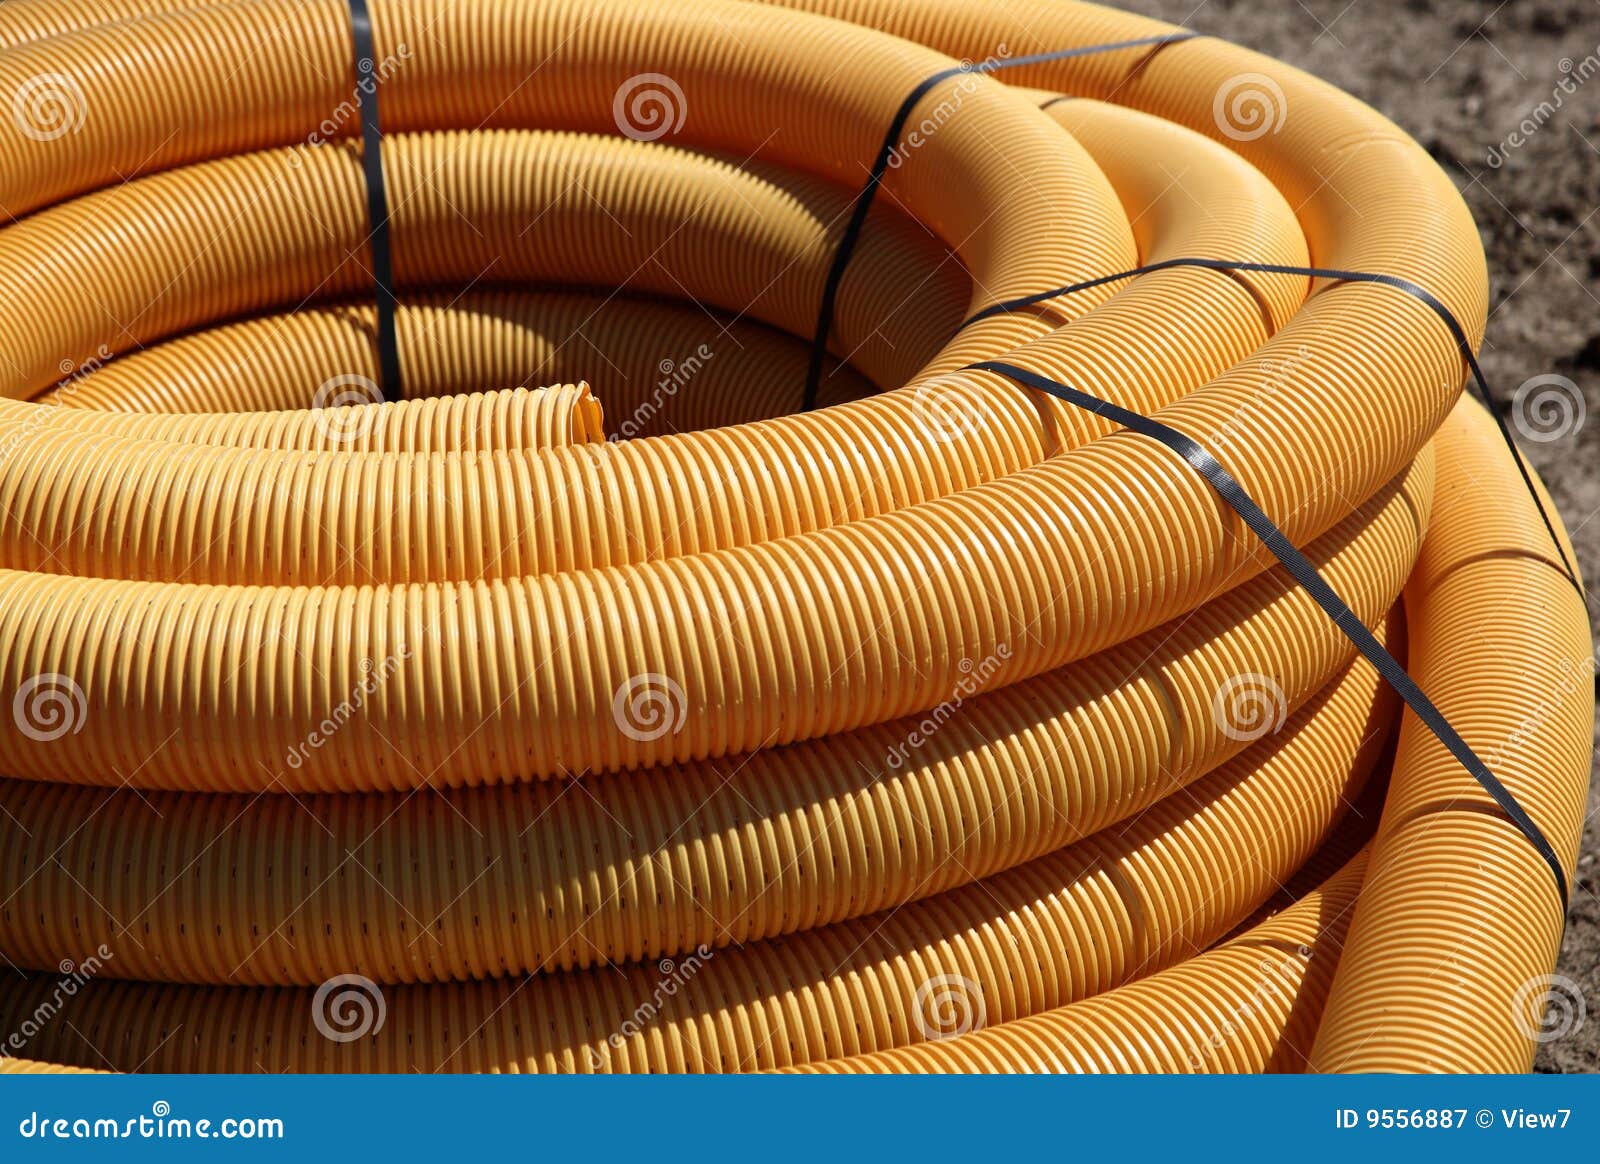 coiled plastic tubing